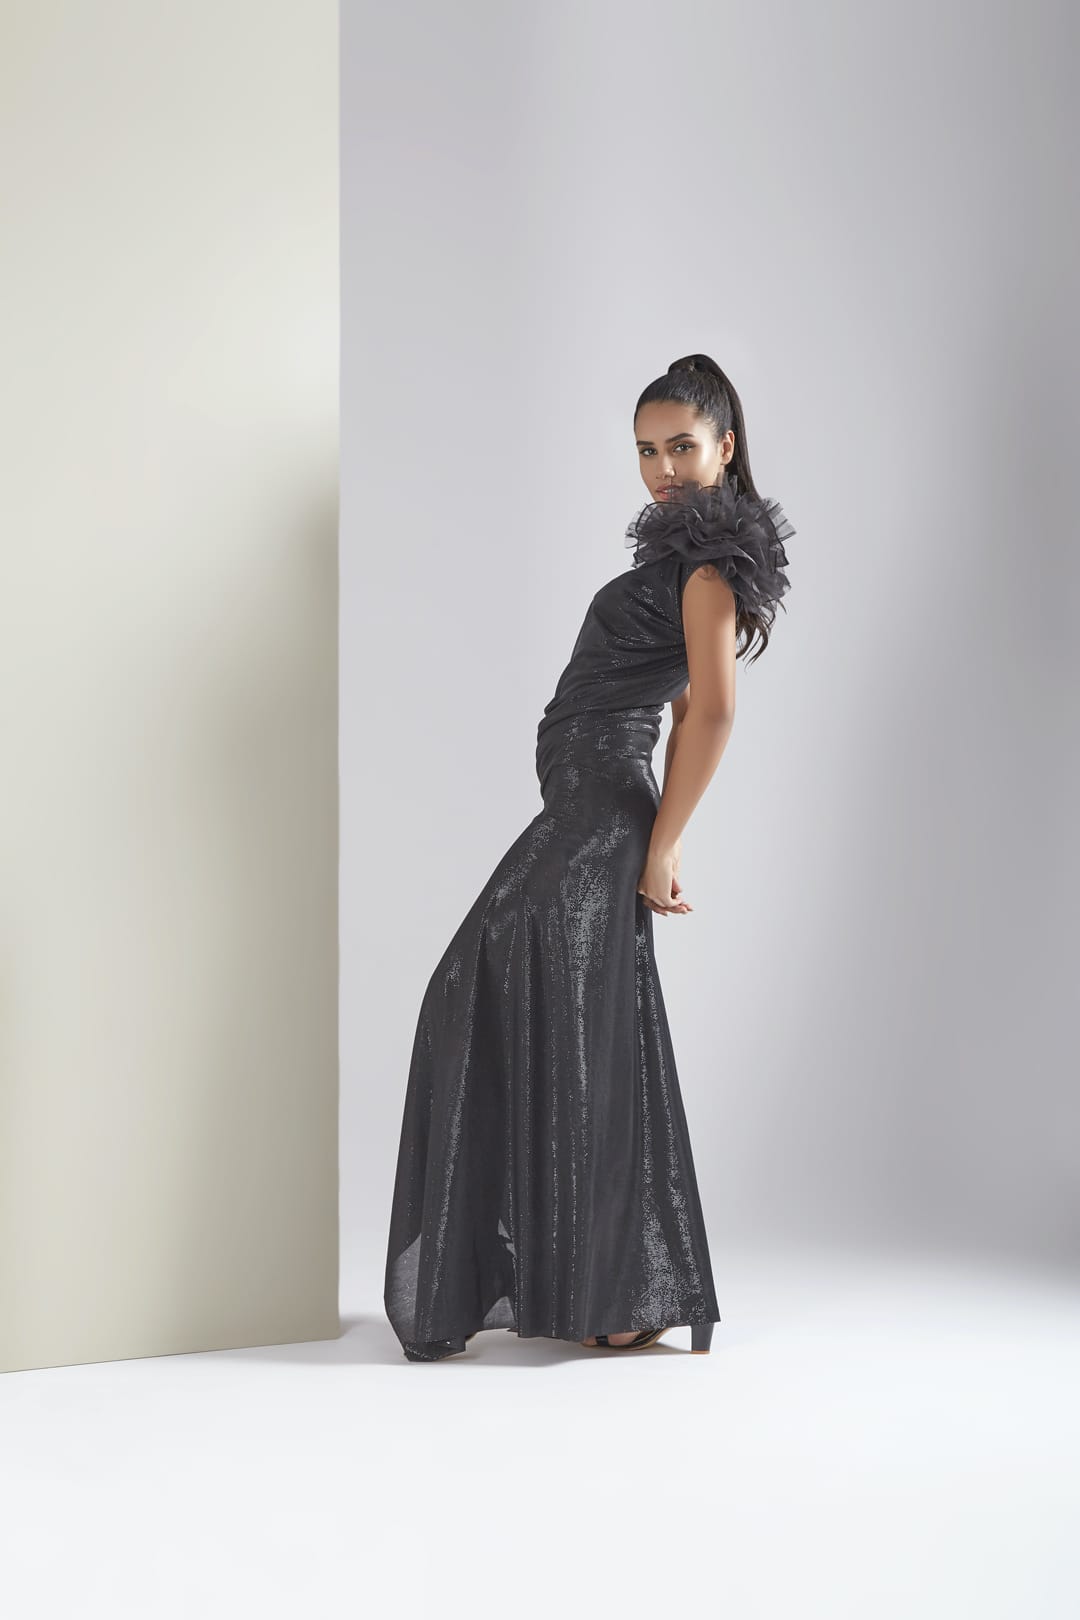 Sophie Sequin Party Dresses - Reema Anand Label